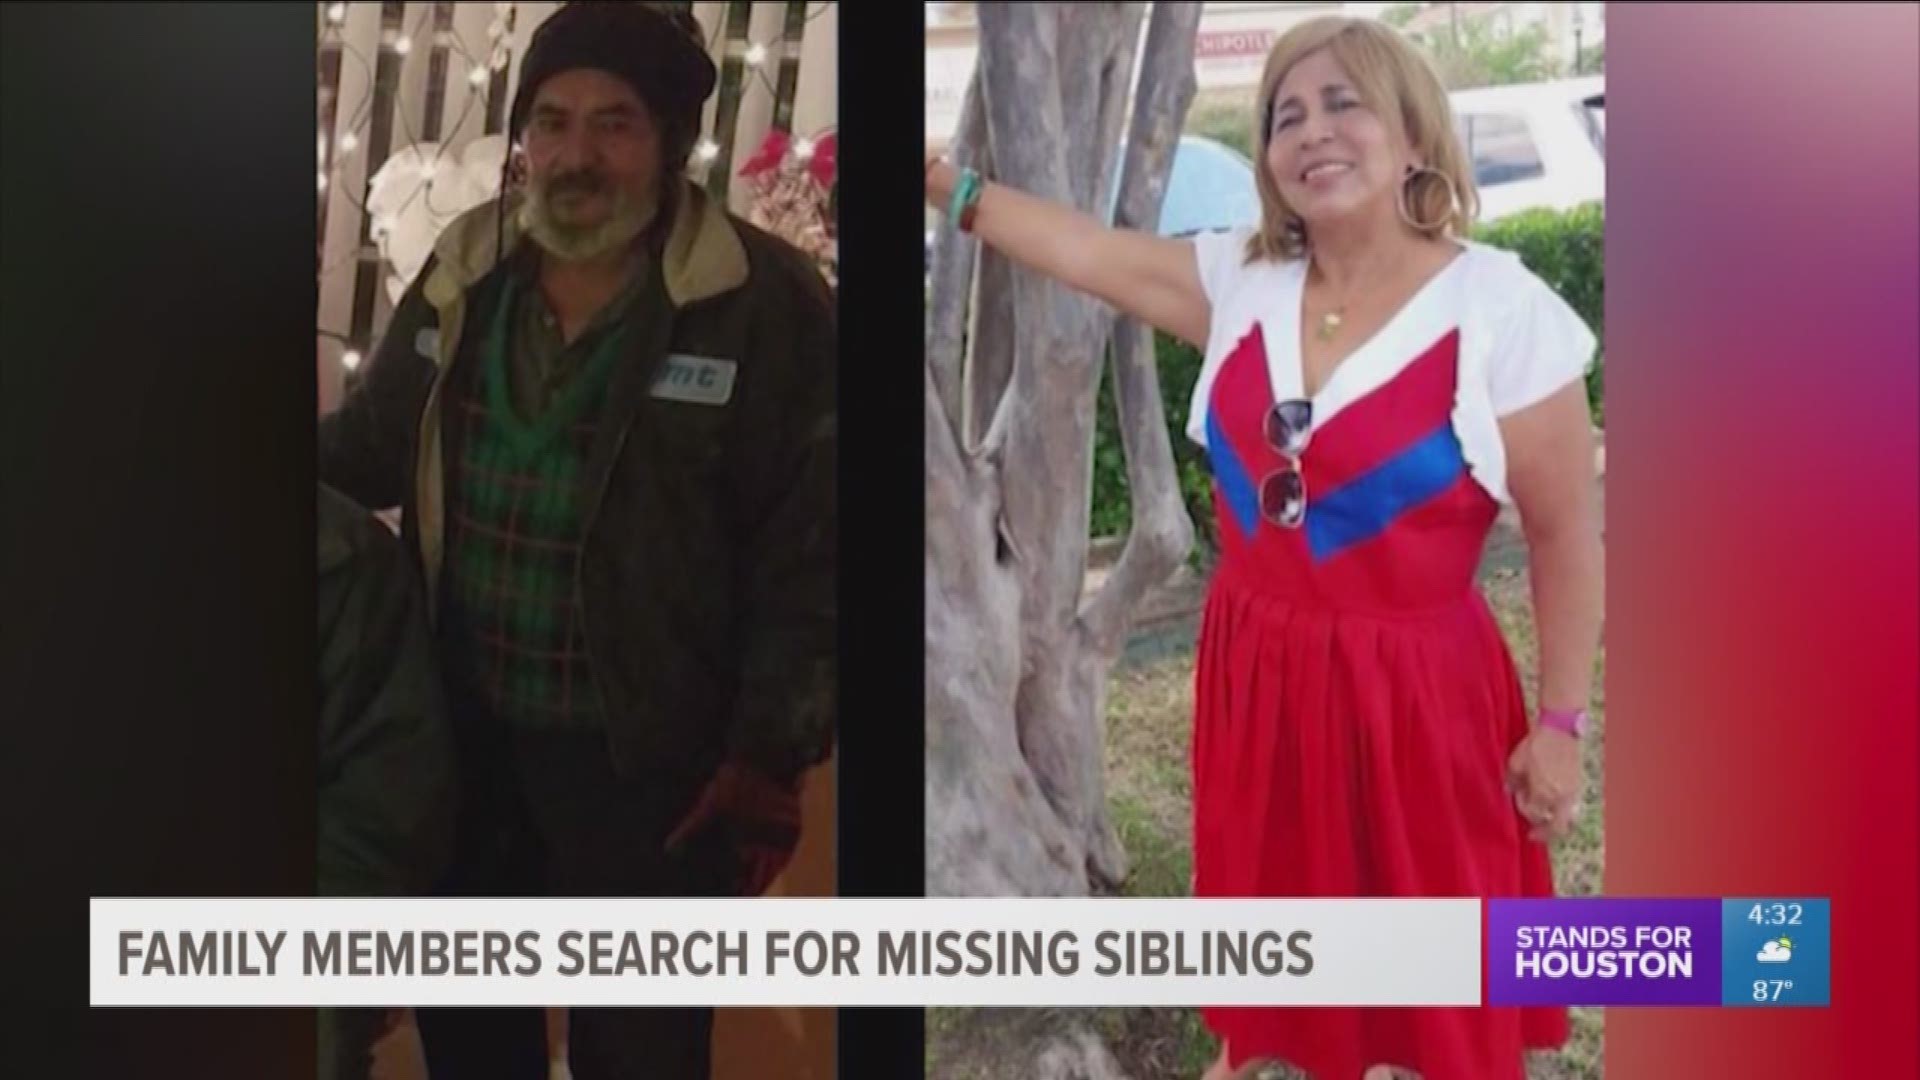 Relatives of two missing siblings say their despair is deepening with each passing day.
Dina Escobar, 60, and her brother, 65-year-old Roy Escobar have been missing for more than a week.